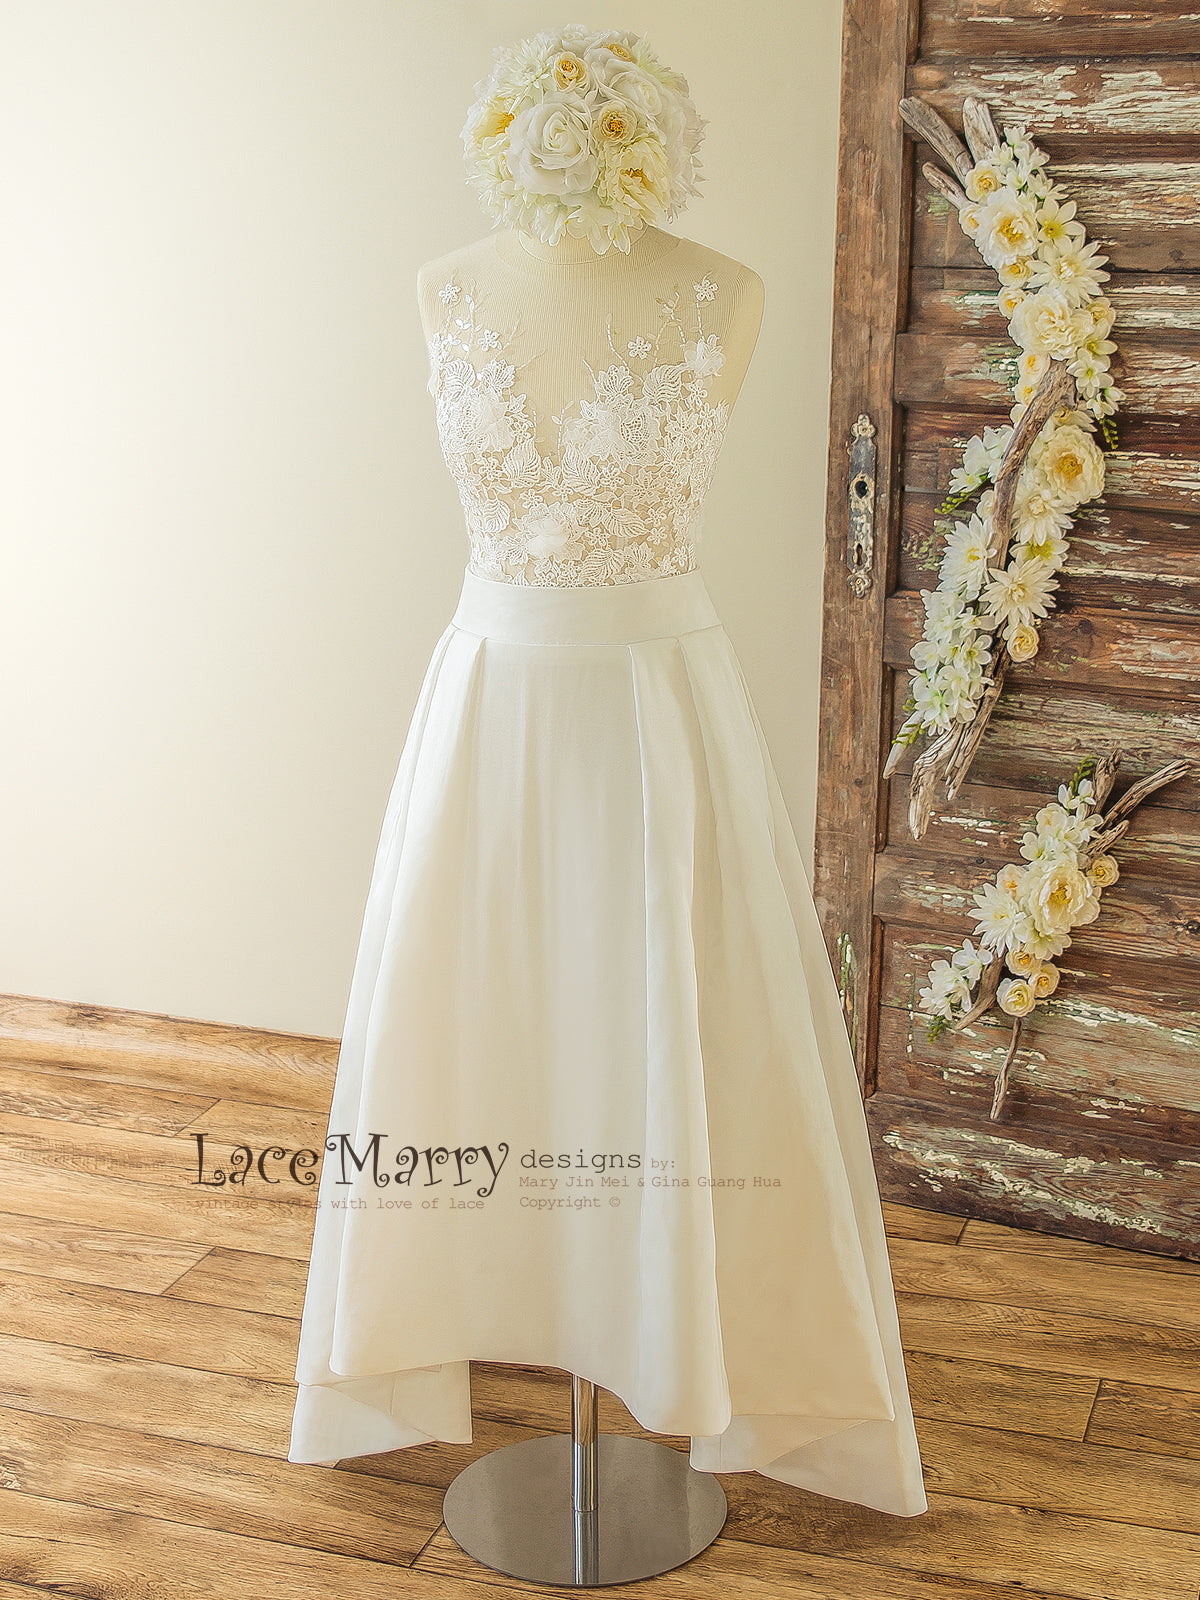 Bridal Separates with High Low Skirt